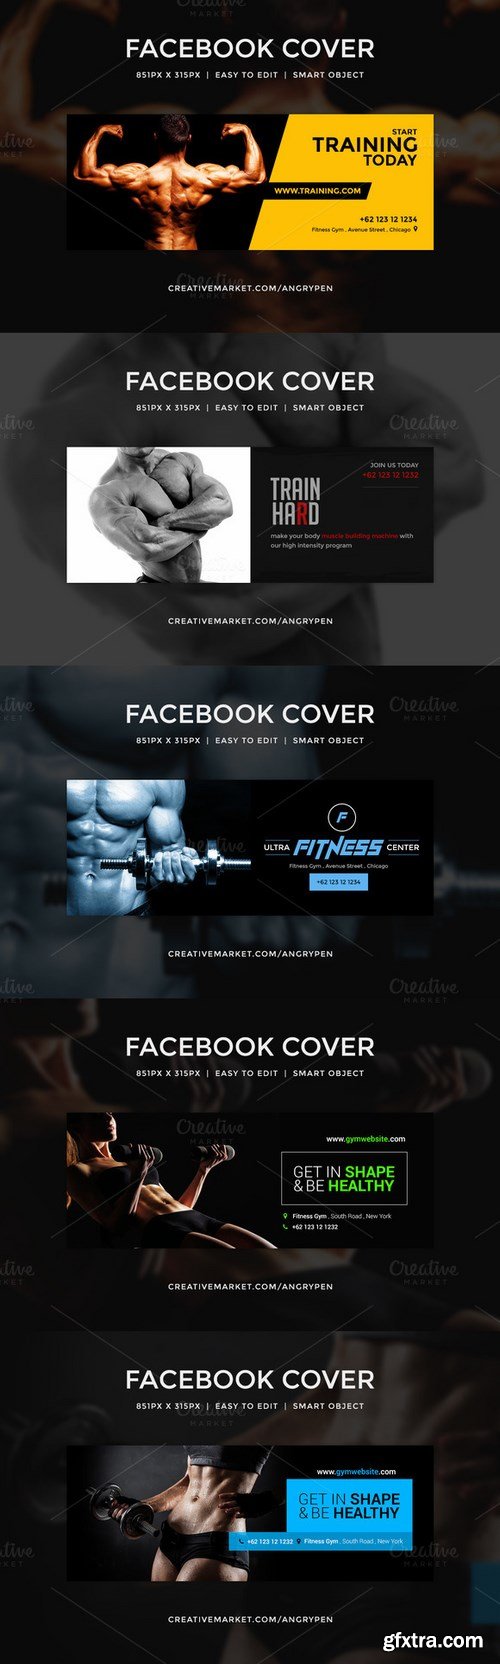 CM - Gym Workout facebook covers 686586